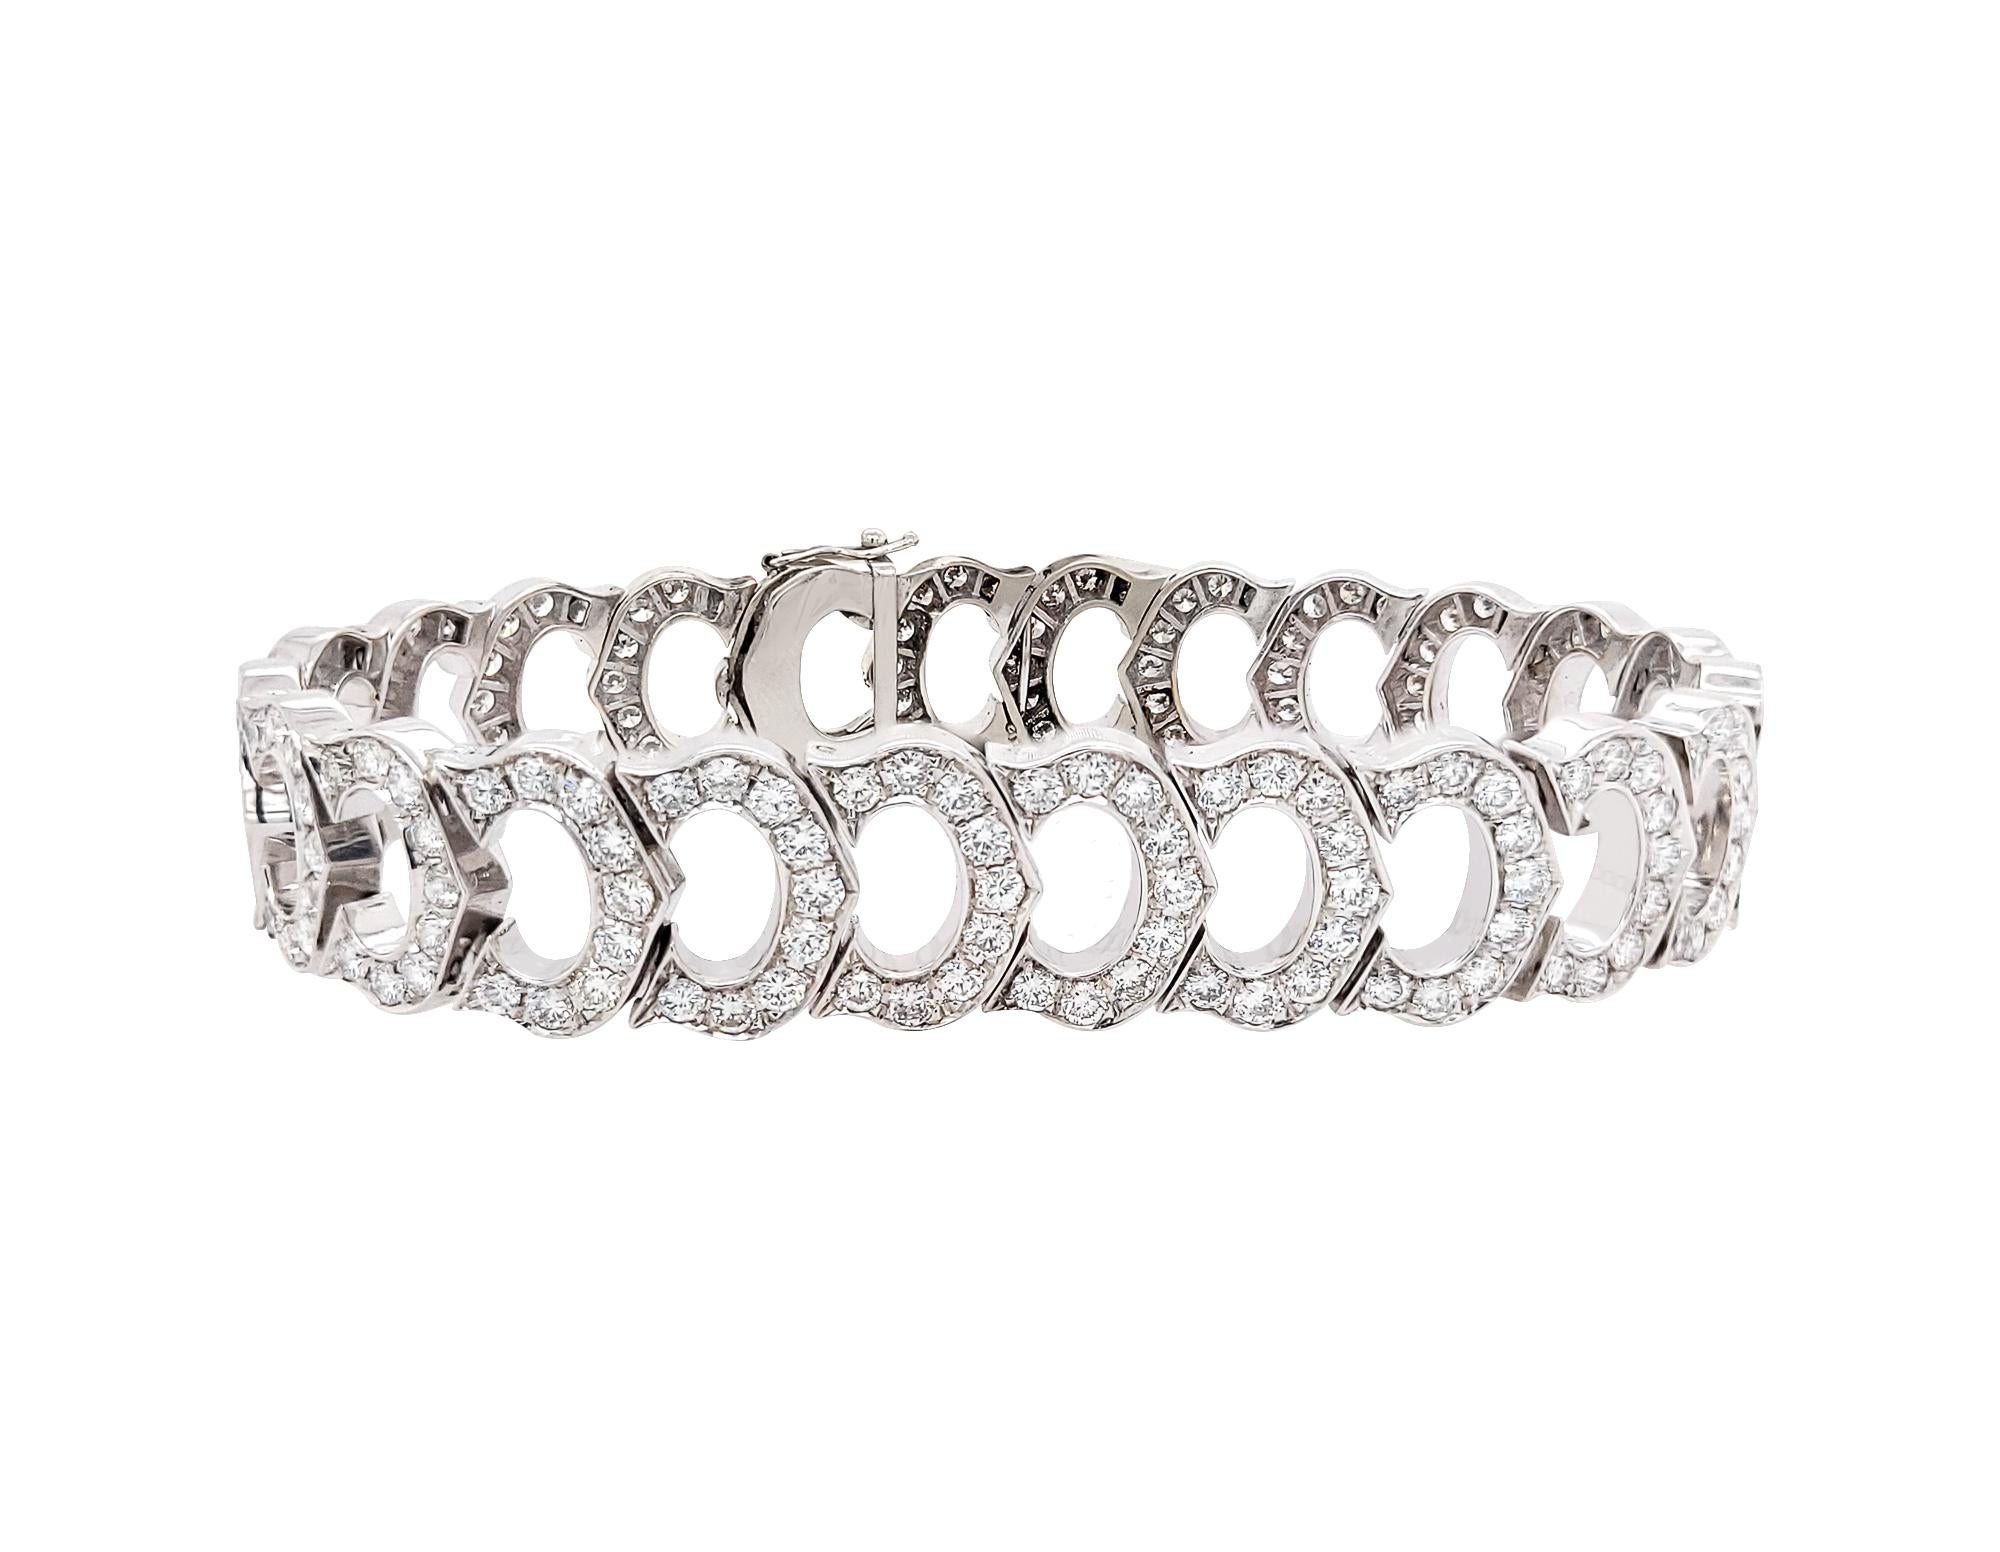 An elegant bracelet decorated with diamonds and mounted in 18K white gold.
216 round diamonds weighing approximately 10.80 carats.
Weight of the bracelet is 31.54 grams.
Length is 7.25 inches.